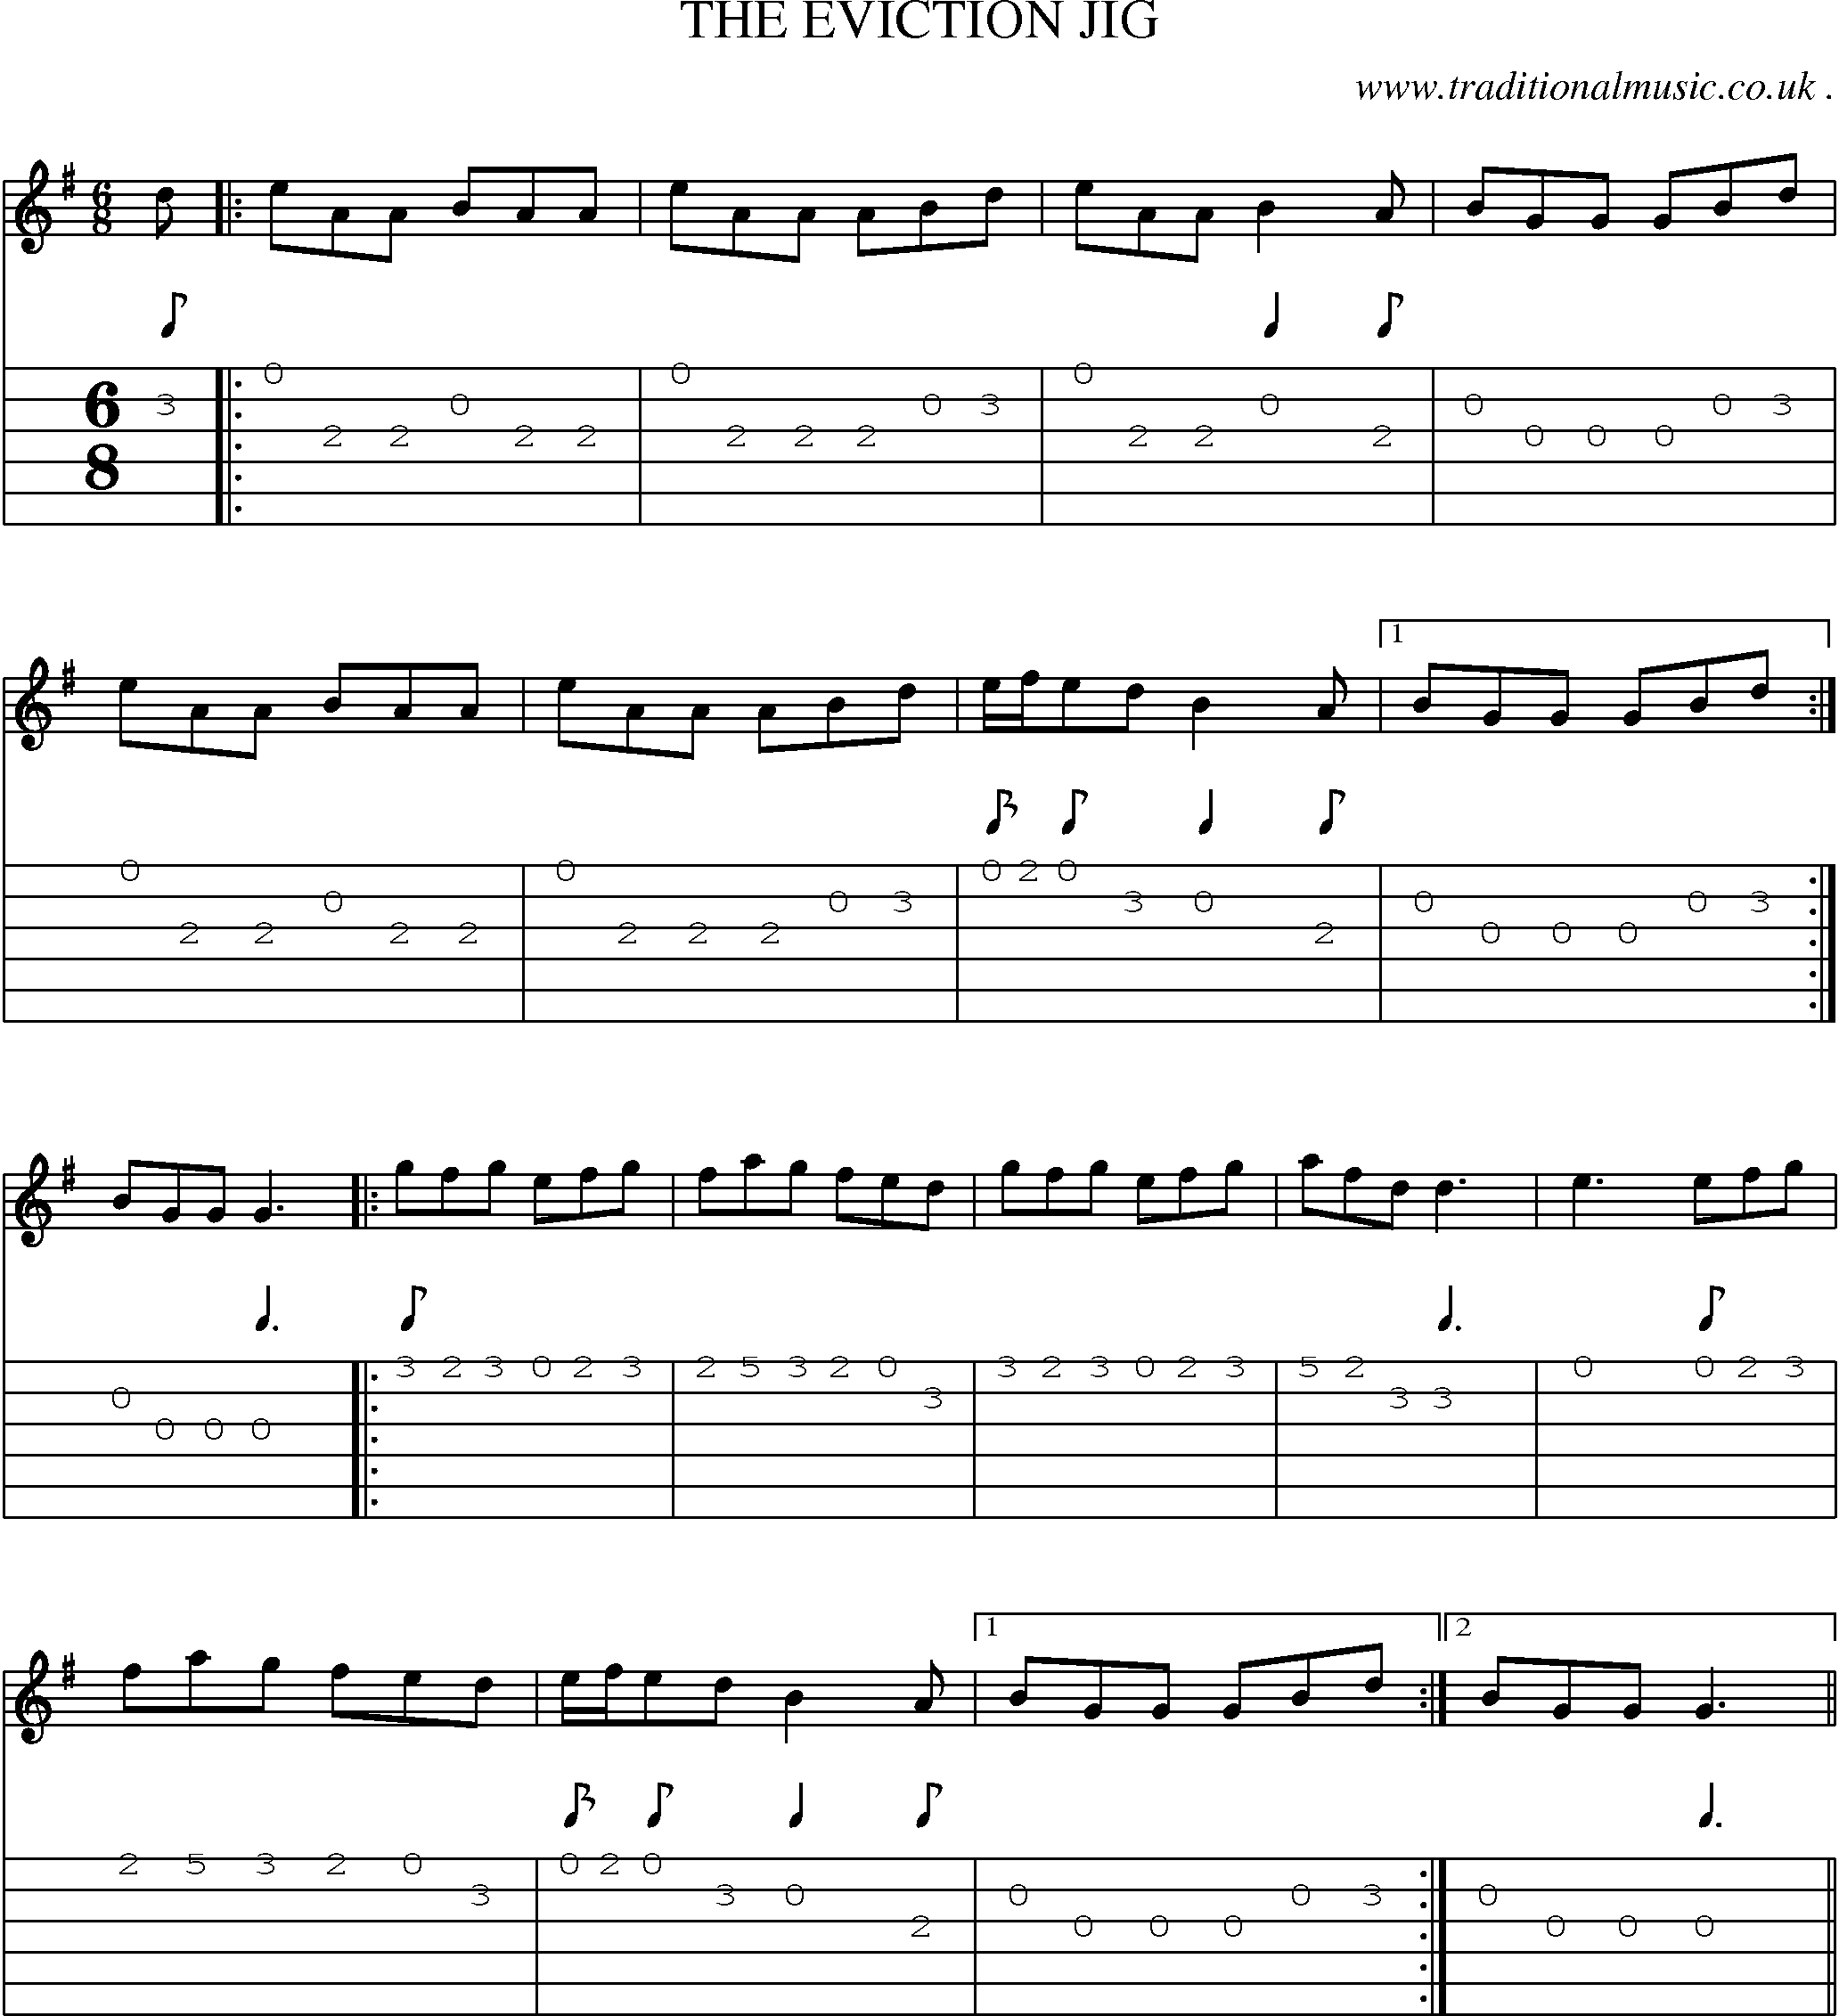 Sheet-Music and Guitar Tabs for The Eviction Jig